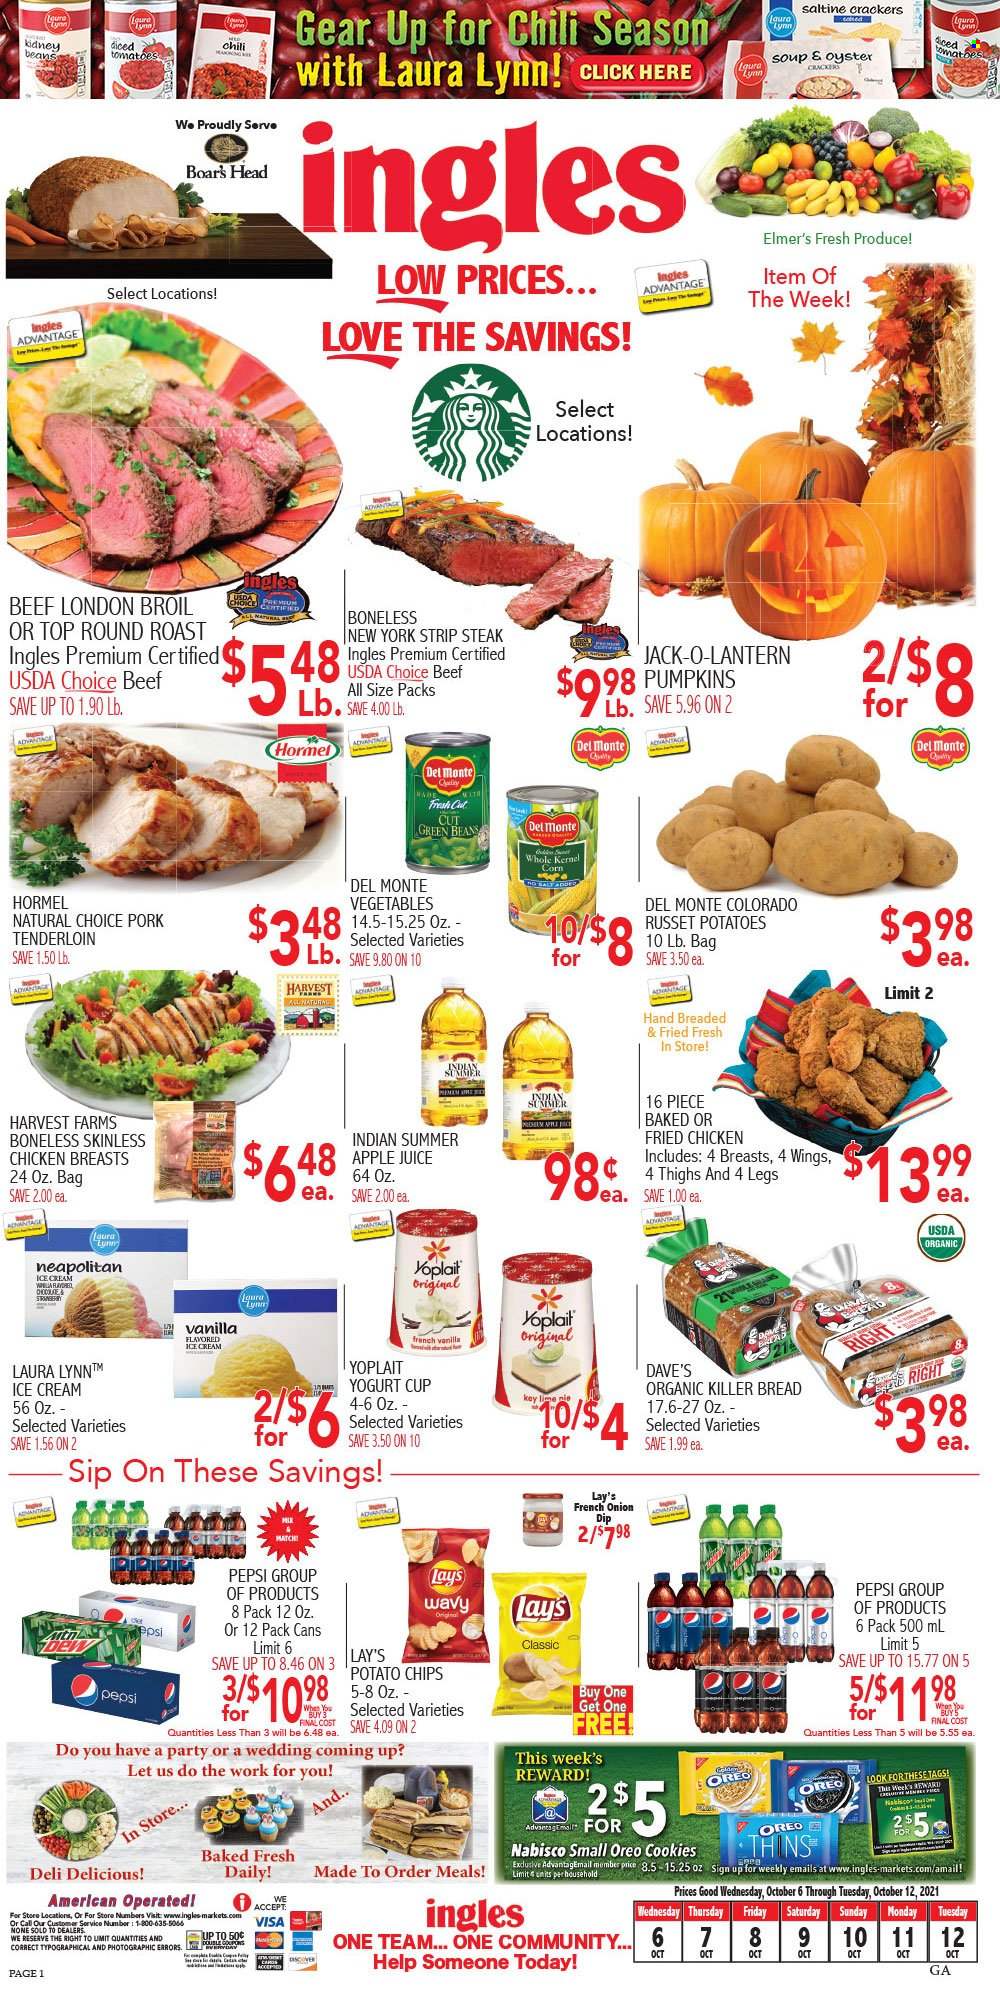 thumbnail - Ingles Flyer - 10/06/2021 - 10/12/2021 - Sales products - bread, beans, corn, green beans, russet potatoes, pumpkin, oysters, soup, fried chicken, Hormel, Oreo, yoghurt, Yoplait, dip, ice cream, cookies, crackers, potato chips, chips, Lay’s, Thins, oyster crackers, kidney beans, apple juice, Pepsi, juice, beef meat, steak, round roast, striploin steak, pork meat, pork tenderloin, cup. Page 1.